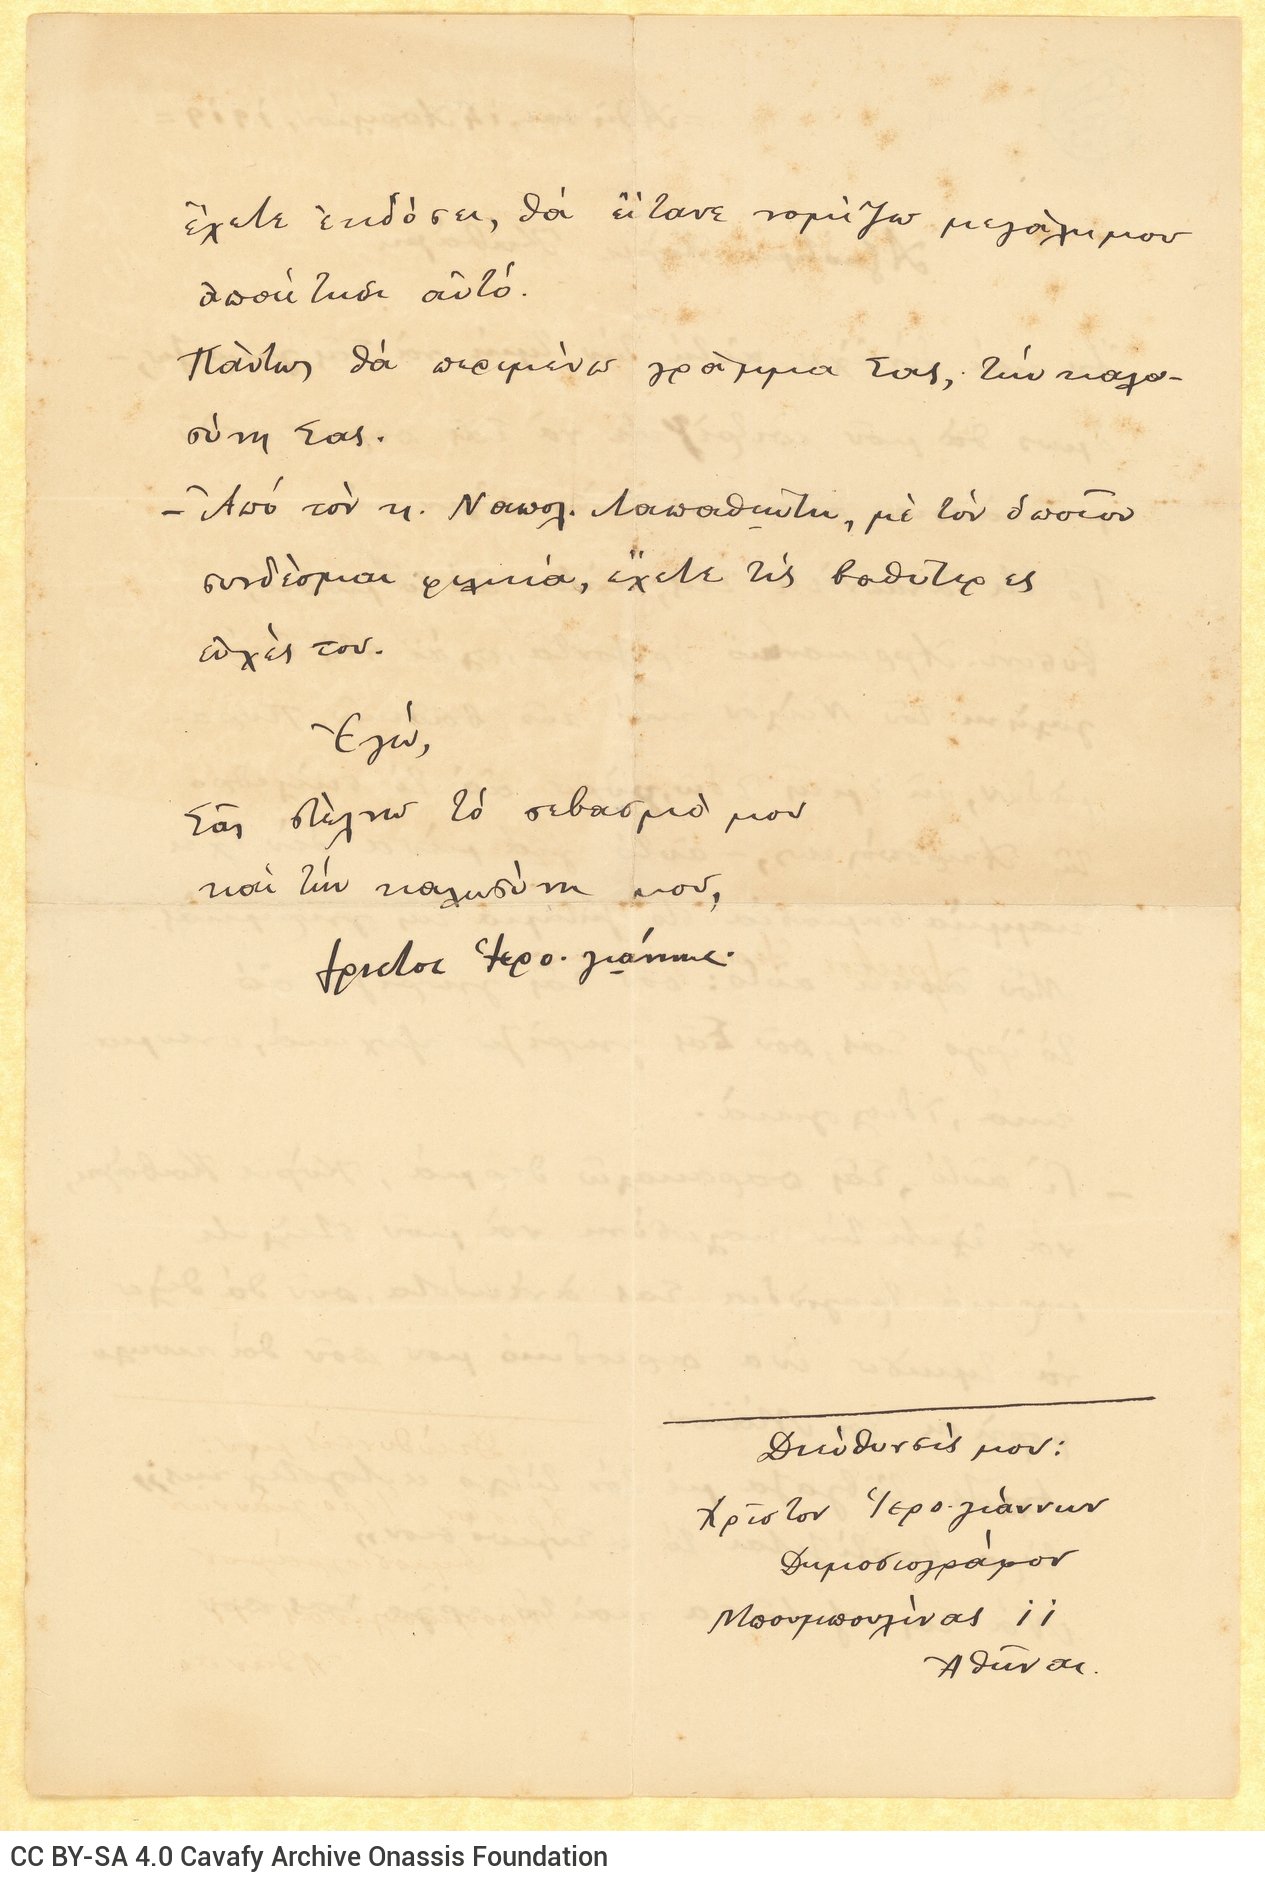 Handwritten letter by Christos Ierogiannis to Cavafy, in which he asks him unpublished poems for publication in the journal *